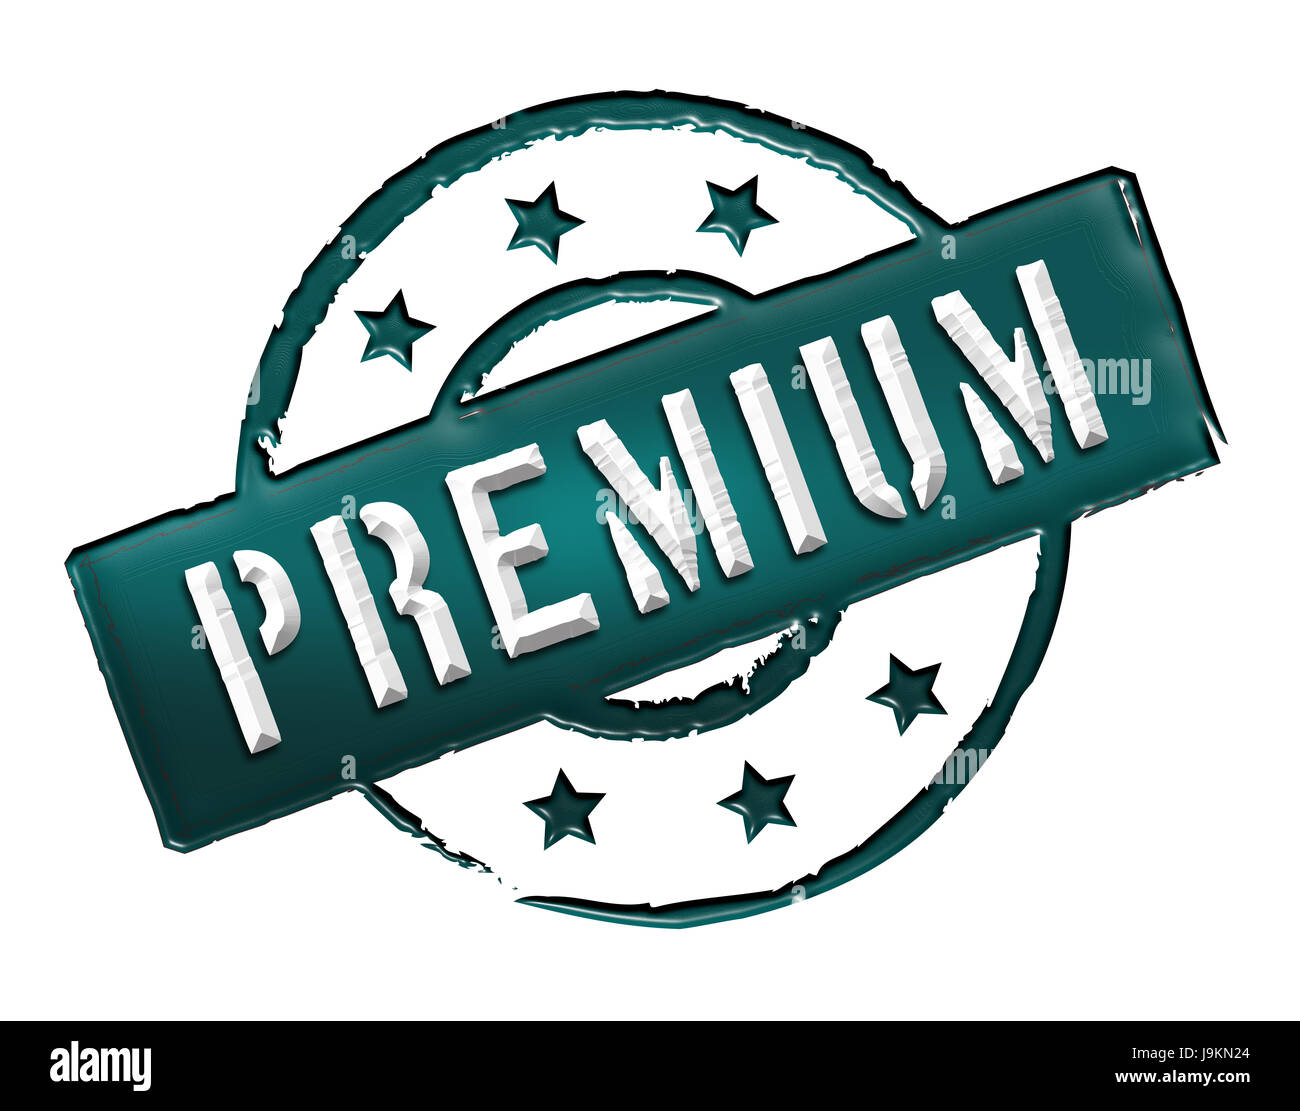 premium, isolated, caution, end, important, class, abstract, high, retro, Stock Photo